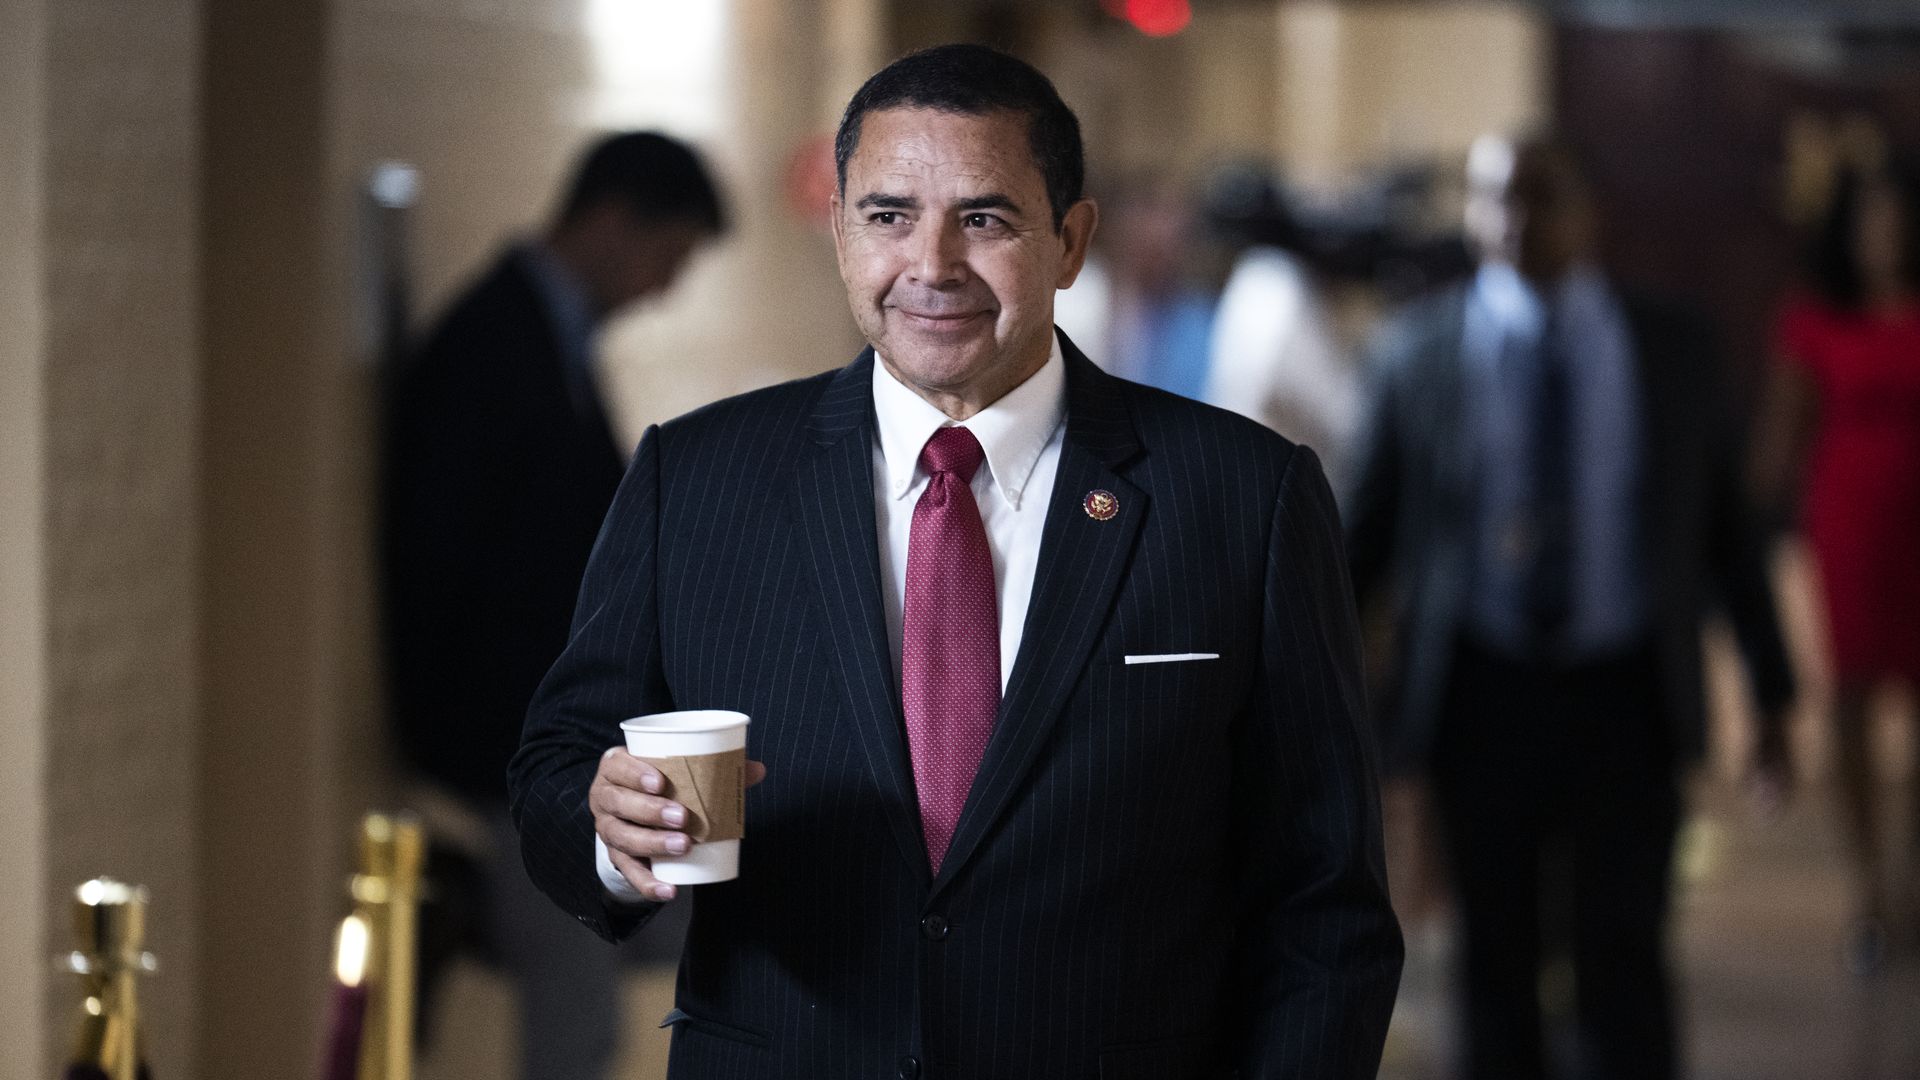 Rep. Henry Cuellar, wearing a pinstripe suit, white shirt and red tie and holding a cup, walking through a Capitol basement hallway.